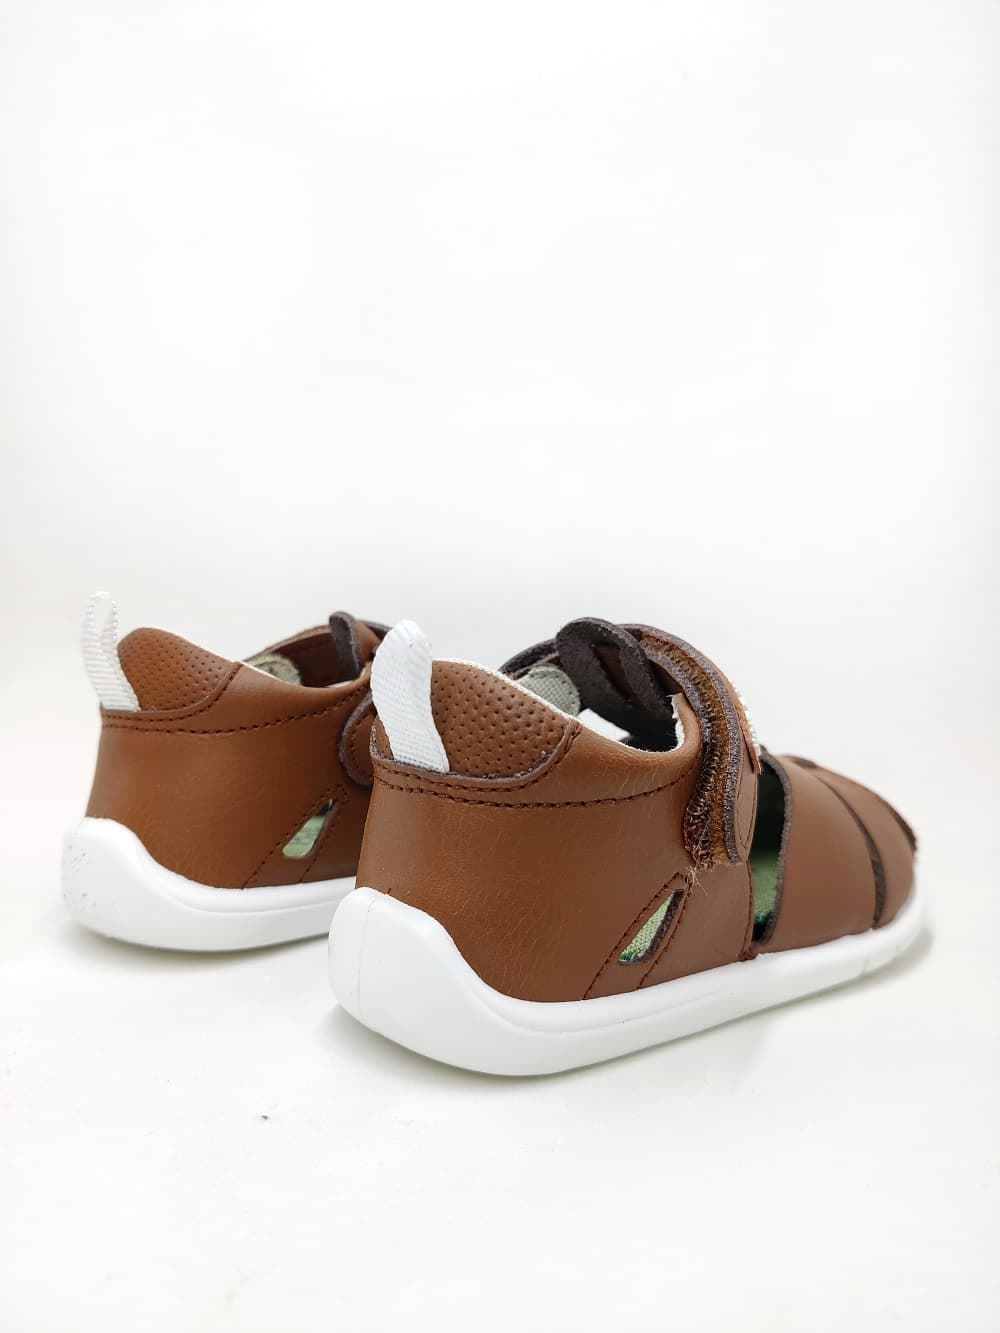 Titanitos Respectful baby sandals Eric Roble - Image 3